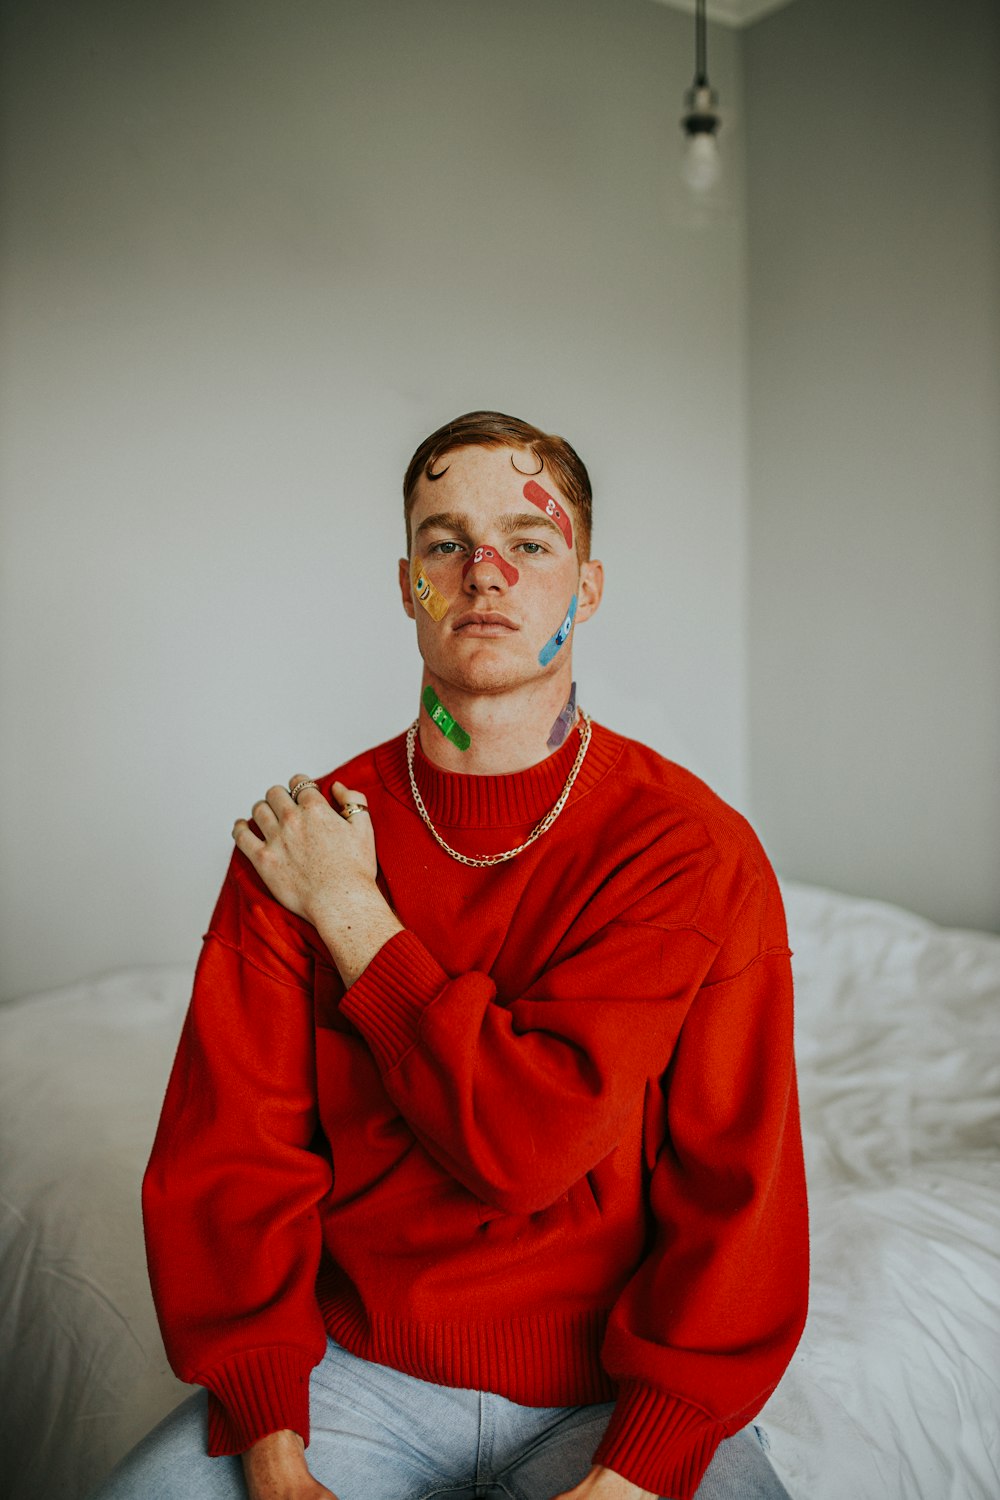 a man with face paint sitting on a bed